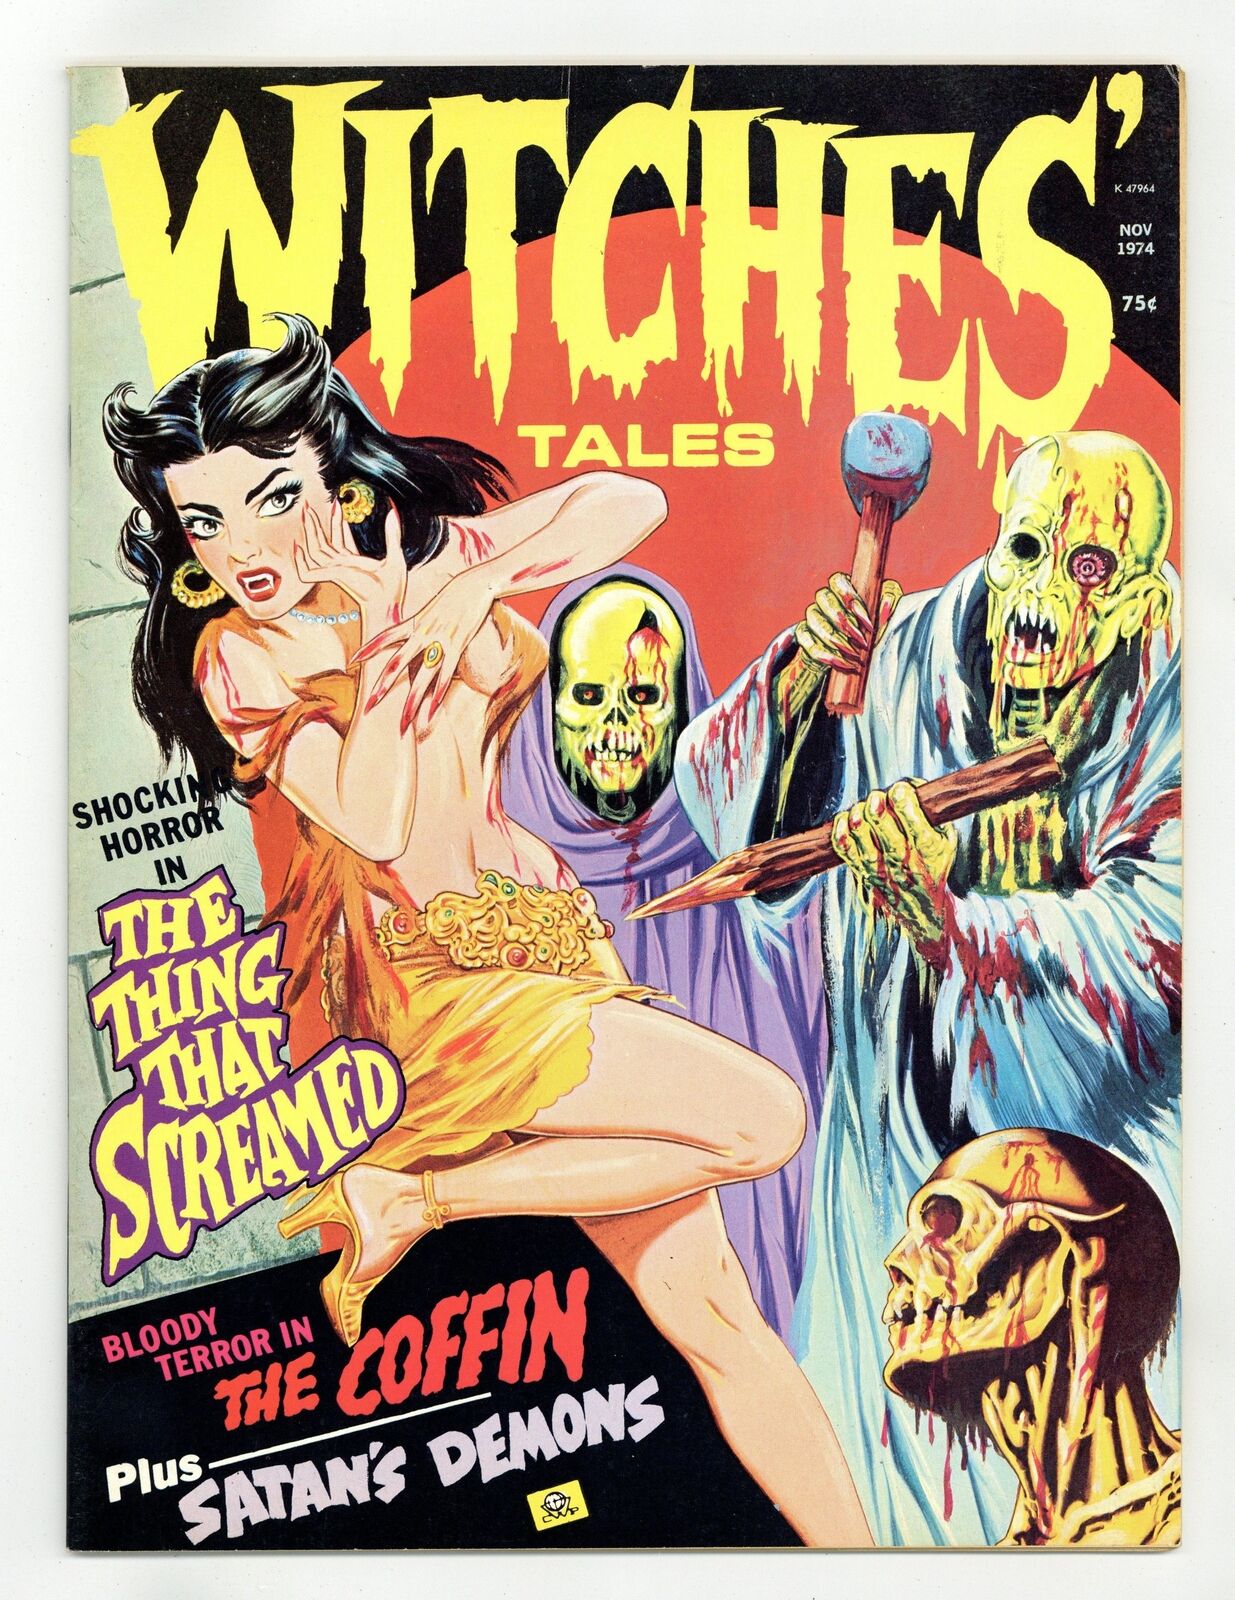 Witches Tales Vol. 6 #6 VG/FN 5.0 1974